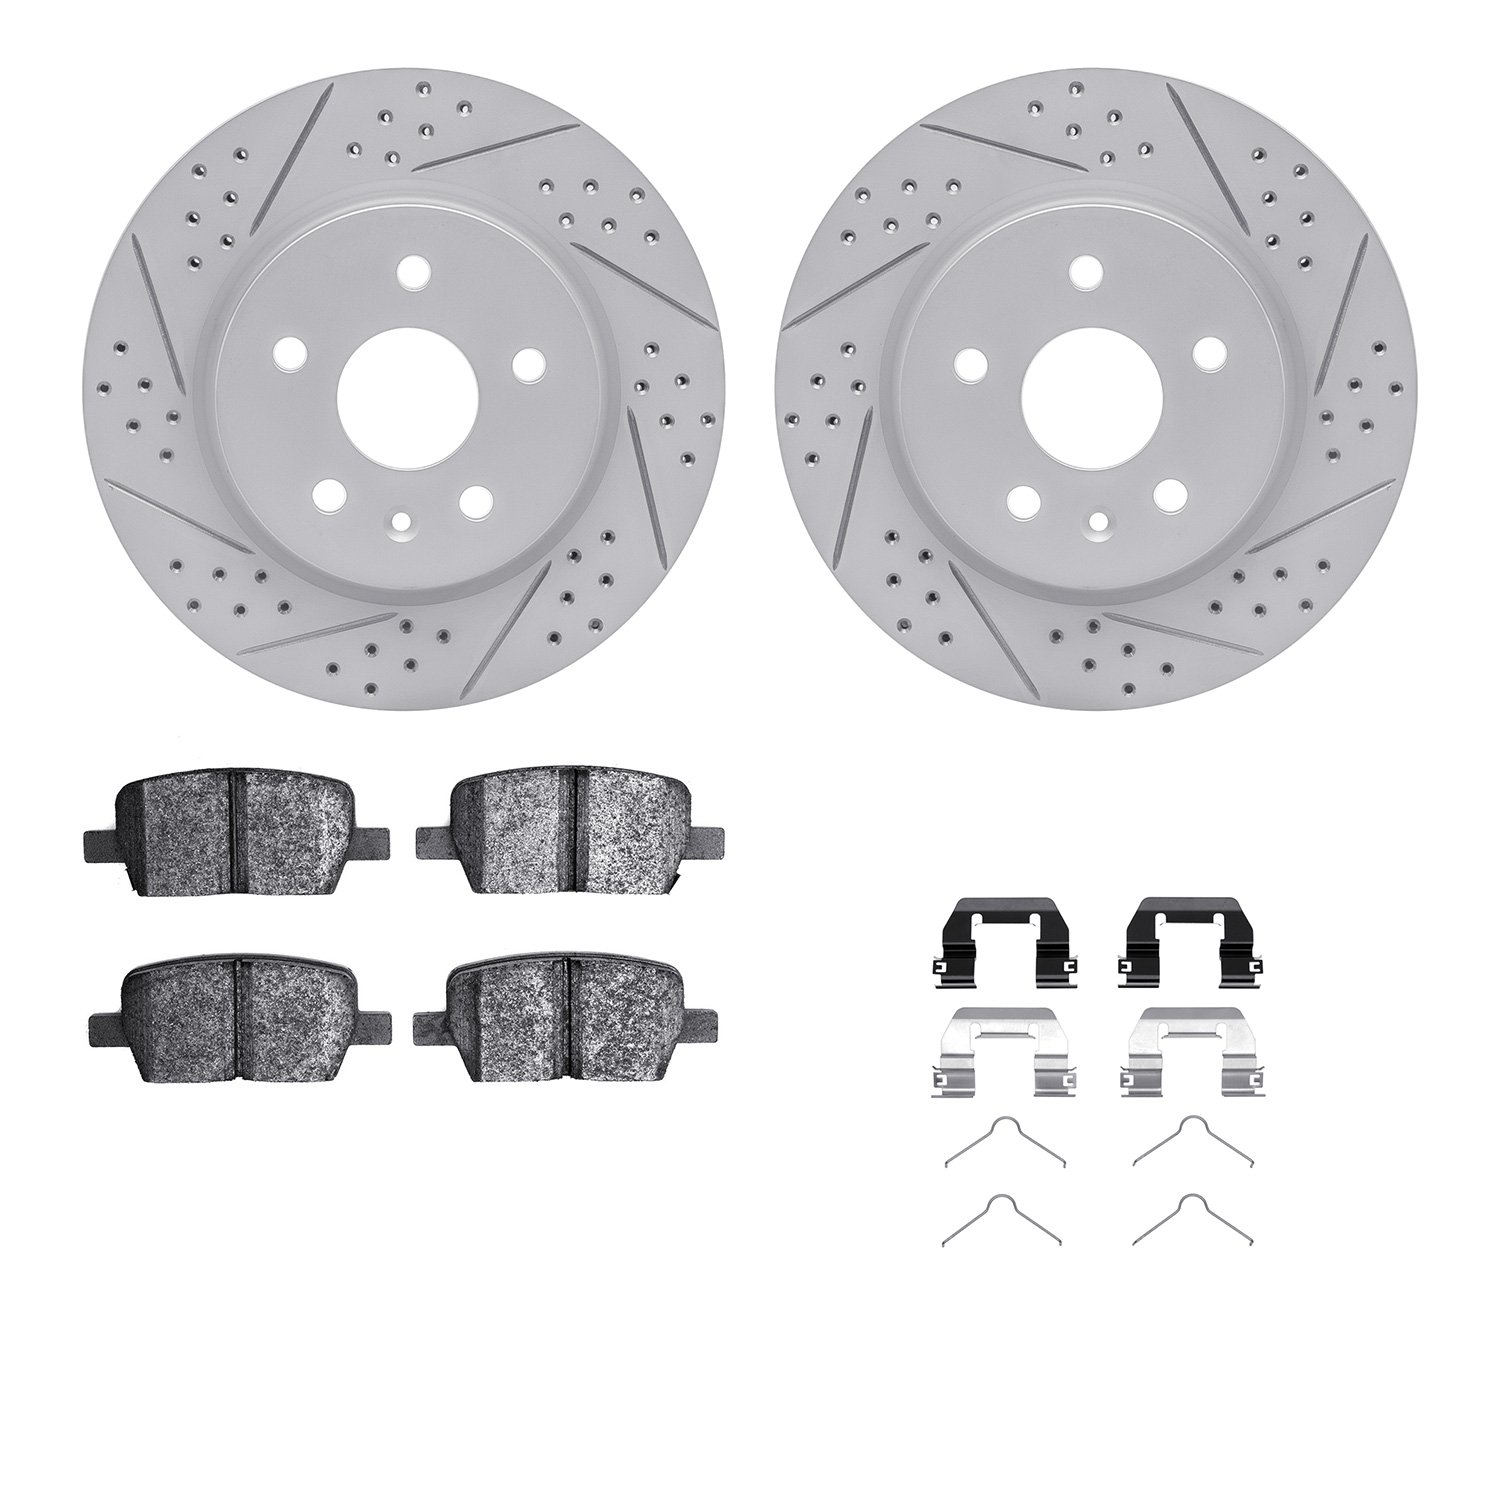 2512-65021 Geoperformance Drilled/Slotted Rotors w/5000 Advanced Brake Pads Kit & Hardware, Fits Select GM, Position: Rear